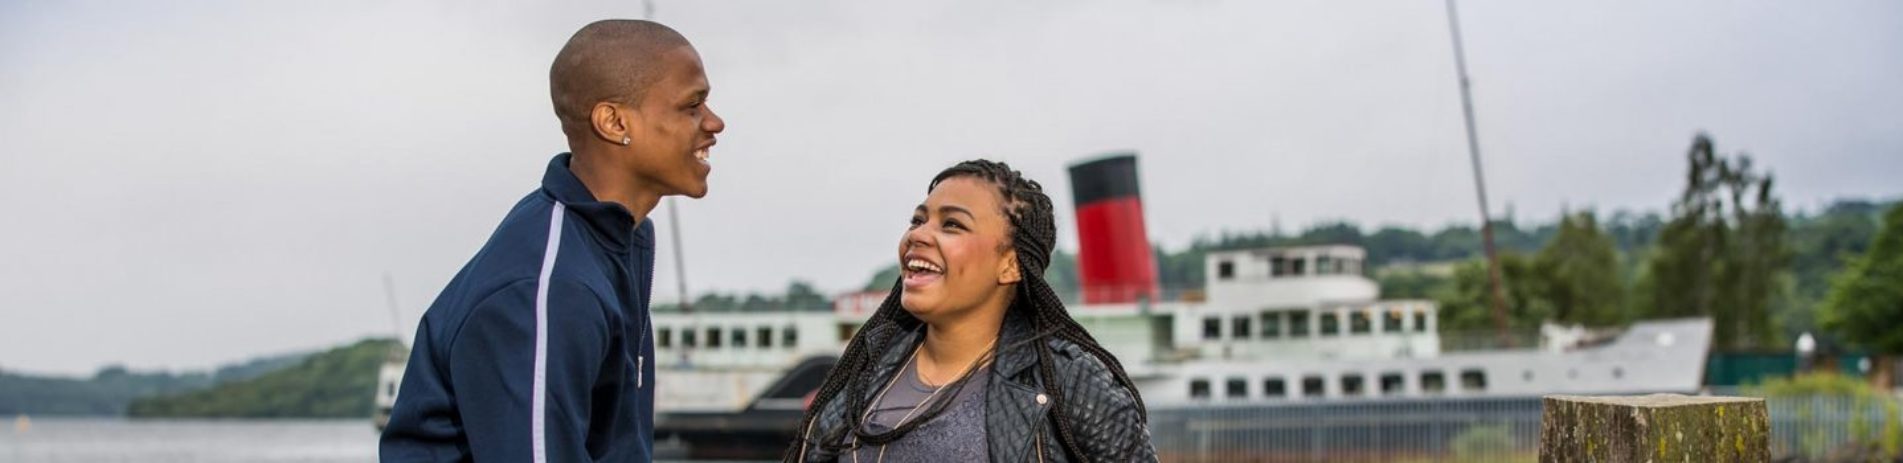 young-black-couple-laughing-at-edge-of-loch-lomond-with-maid-of-loch-steamship-behind